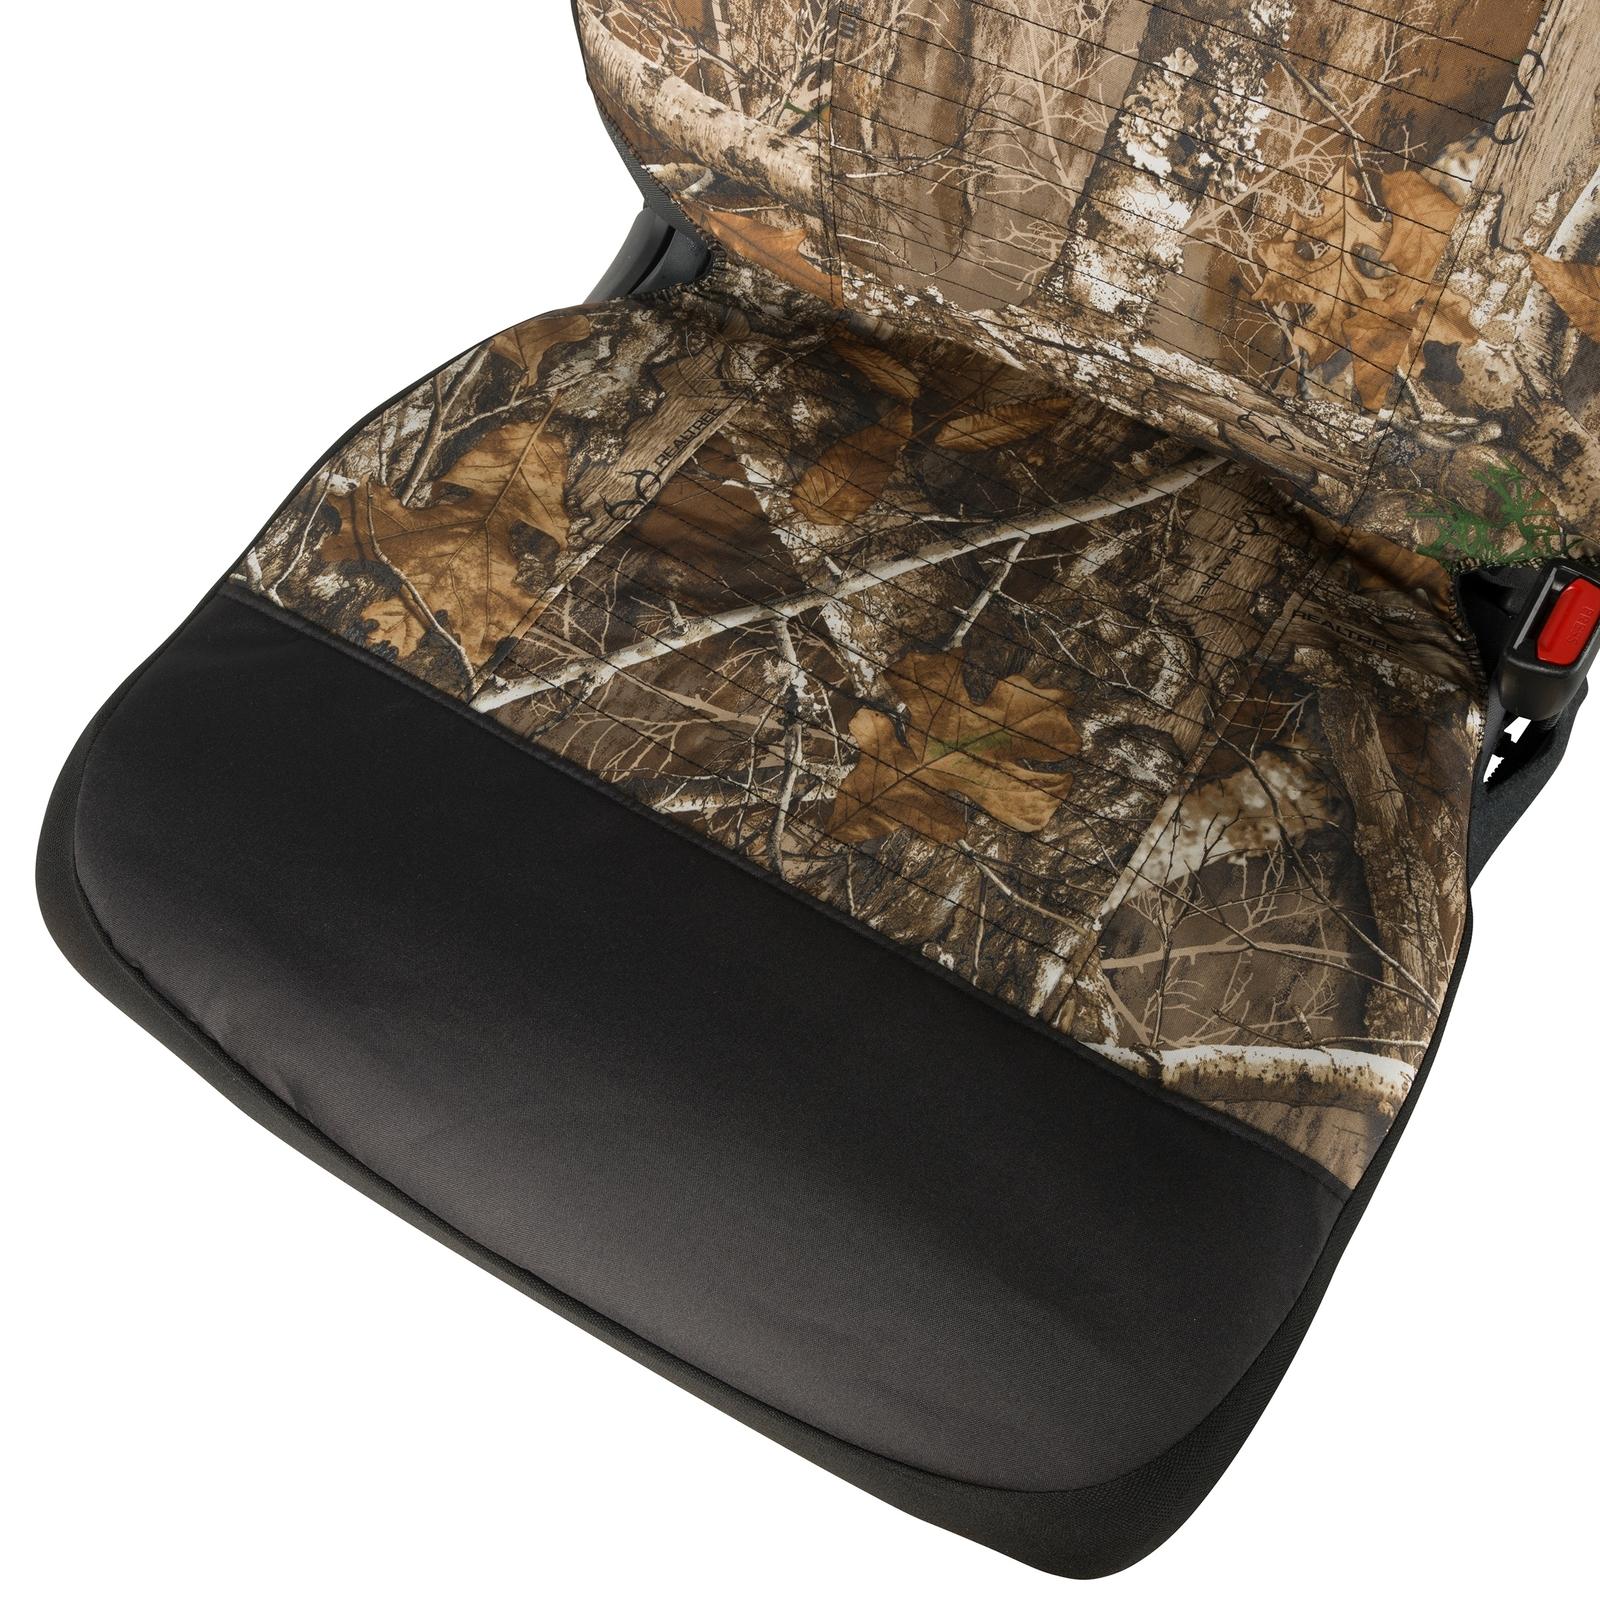 Realtree American Antler Low Back Seat Cover